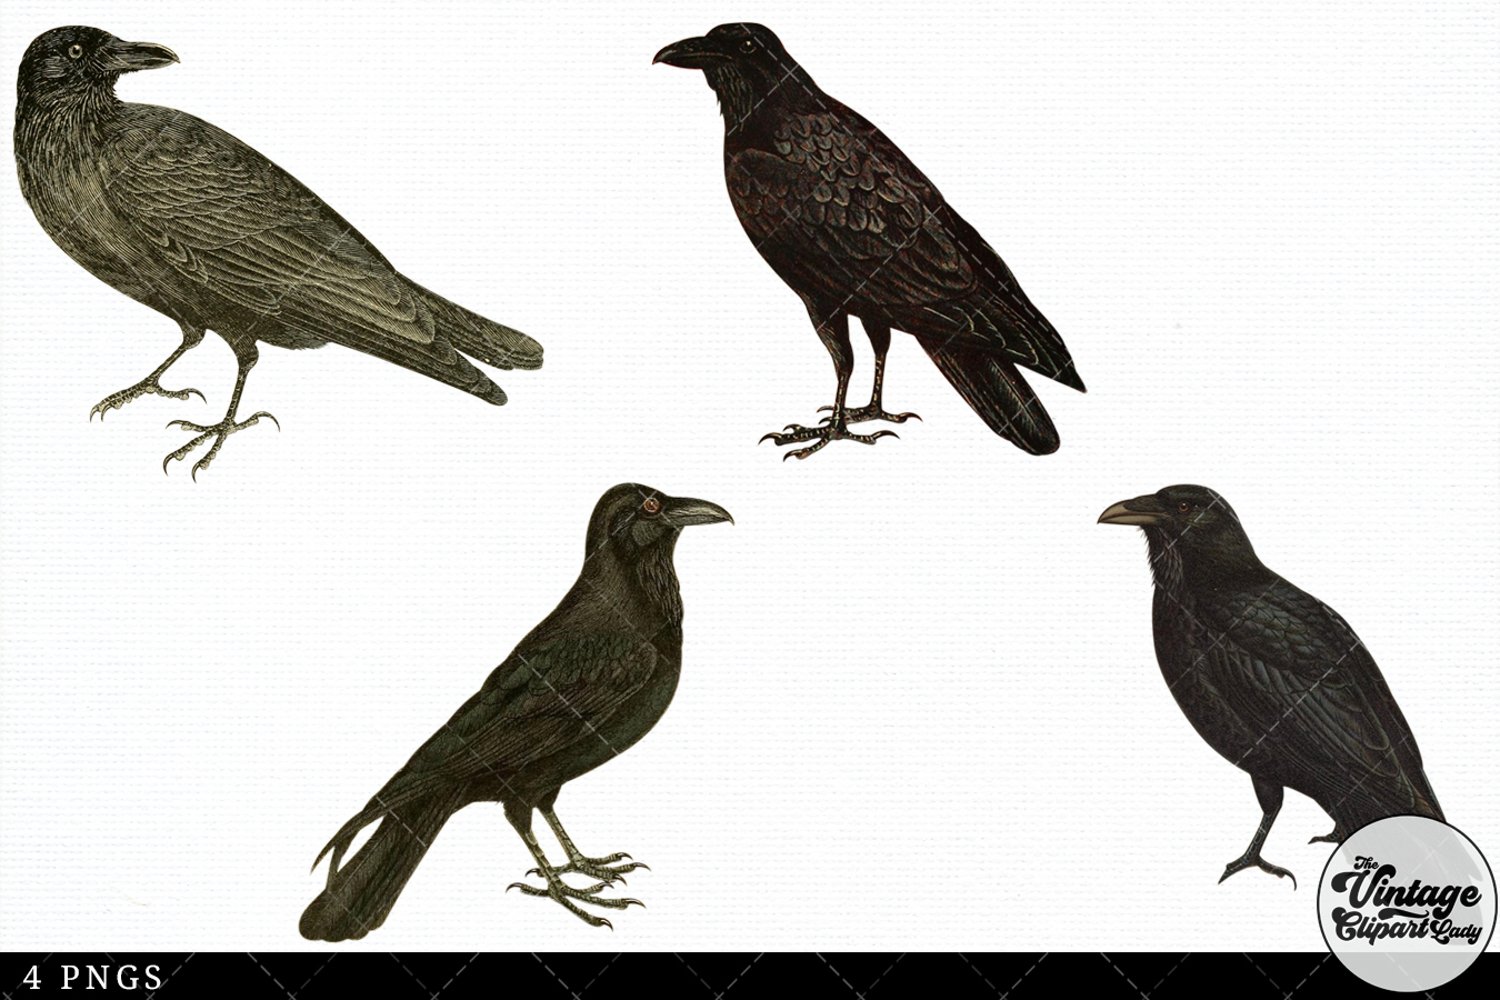 This is an antique raven bird collection.